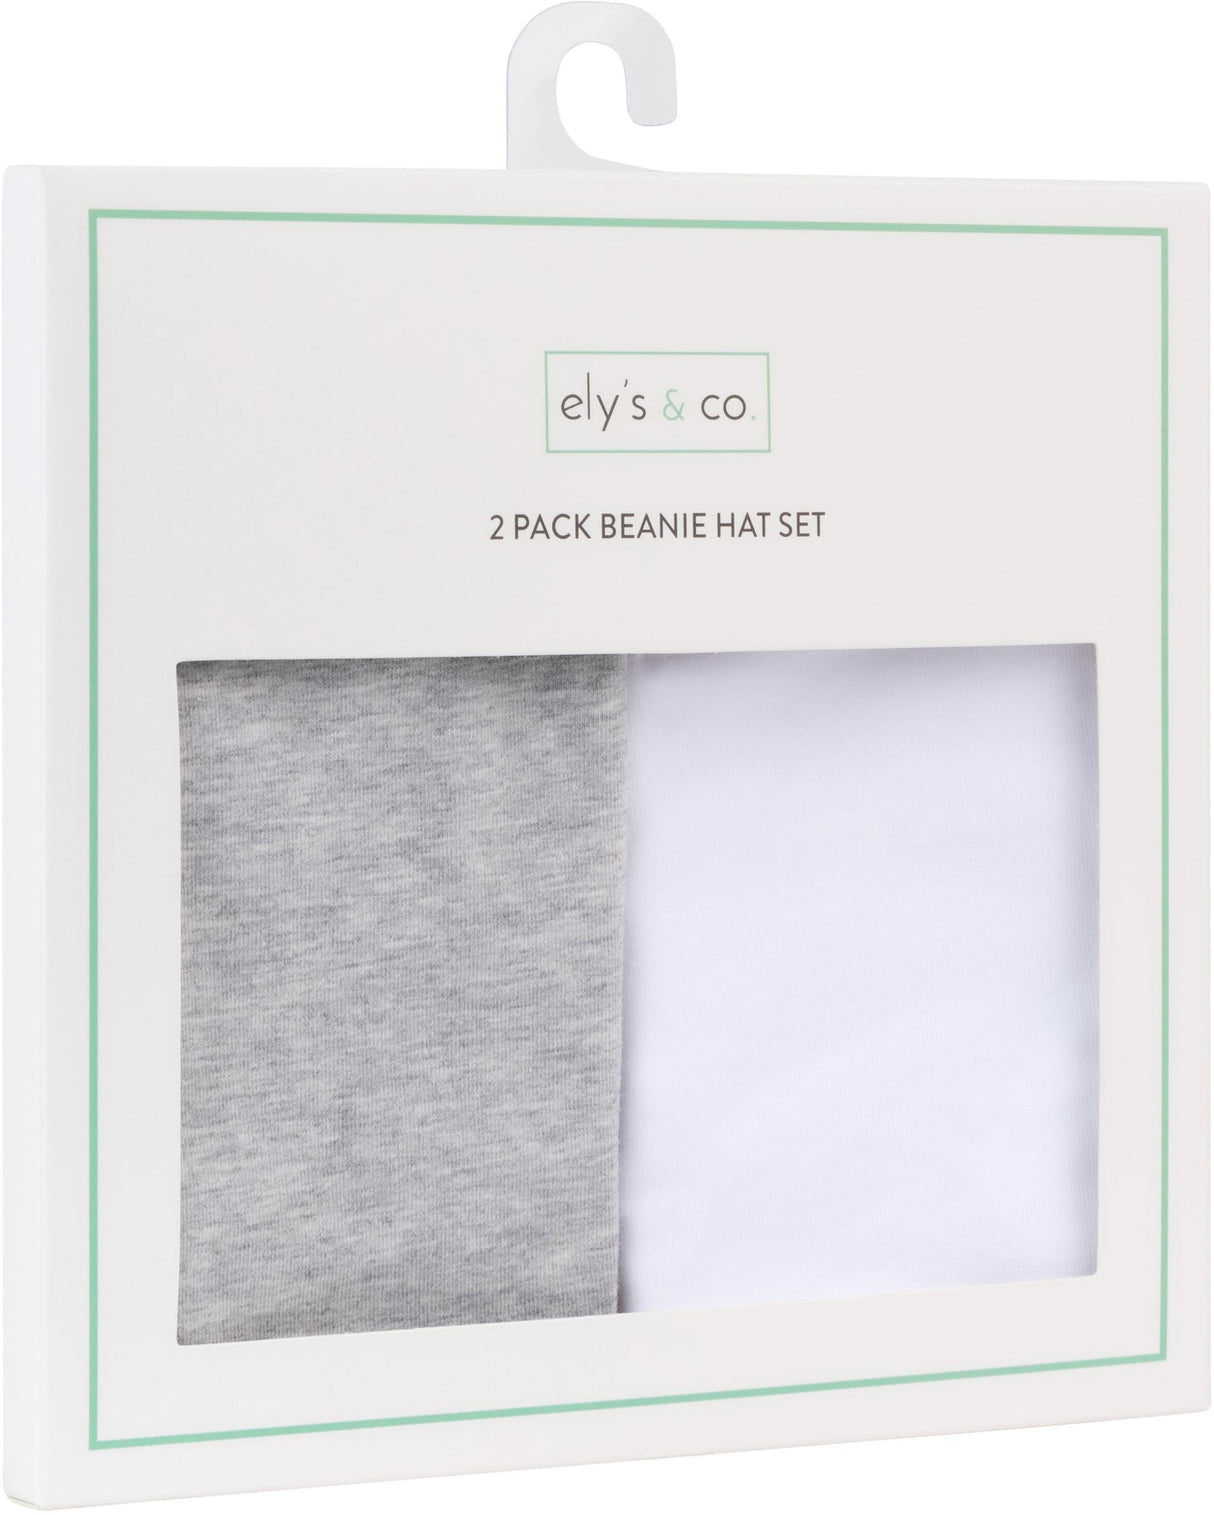 Ely's & Co Baby Beanie Hat 2 Pack